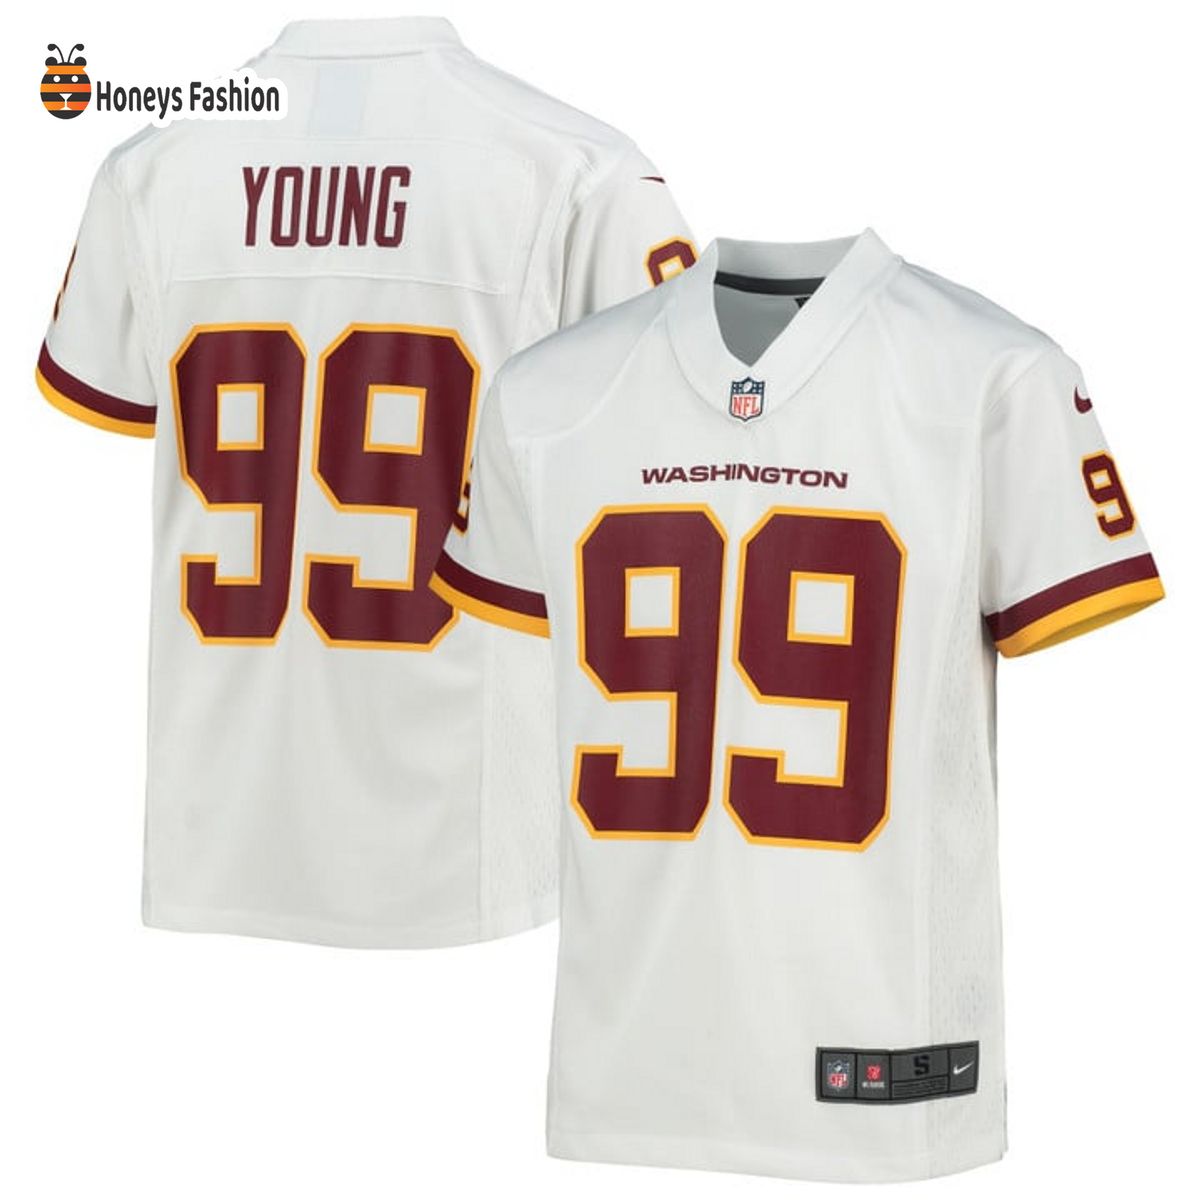 Chase Young Washington Football Team Nike Youth White Game Jersey